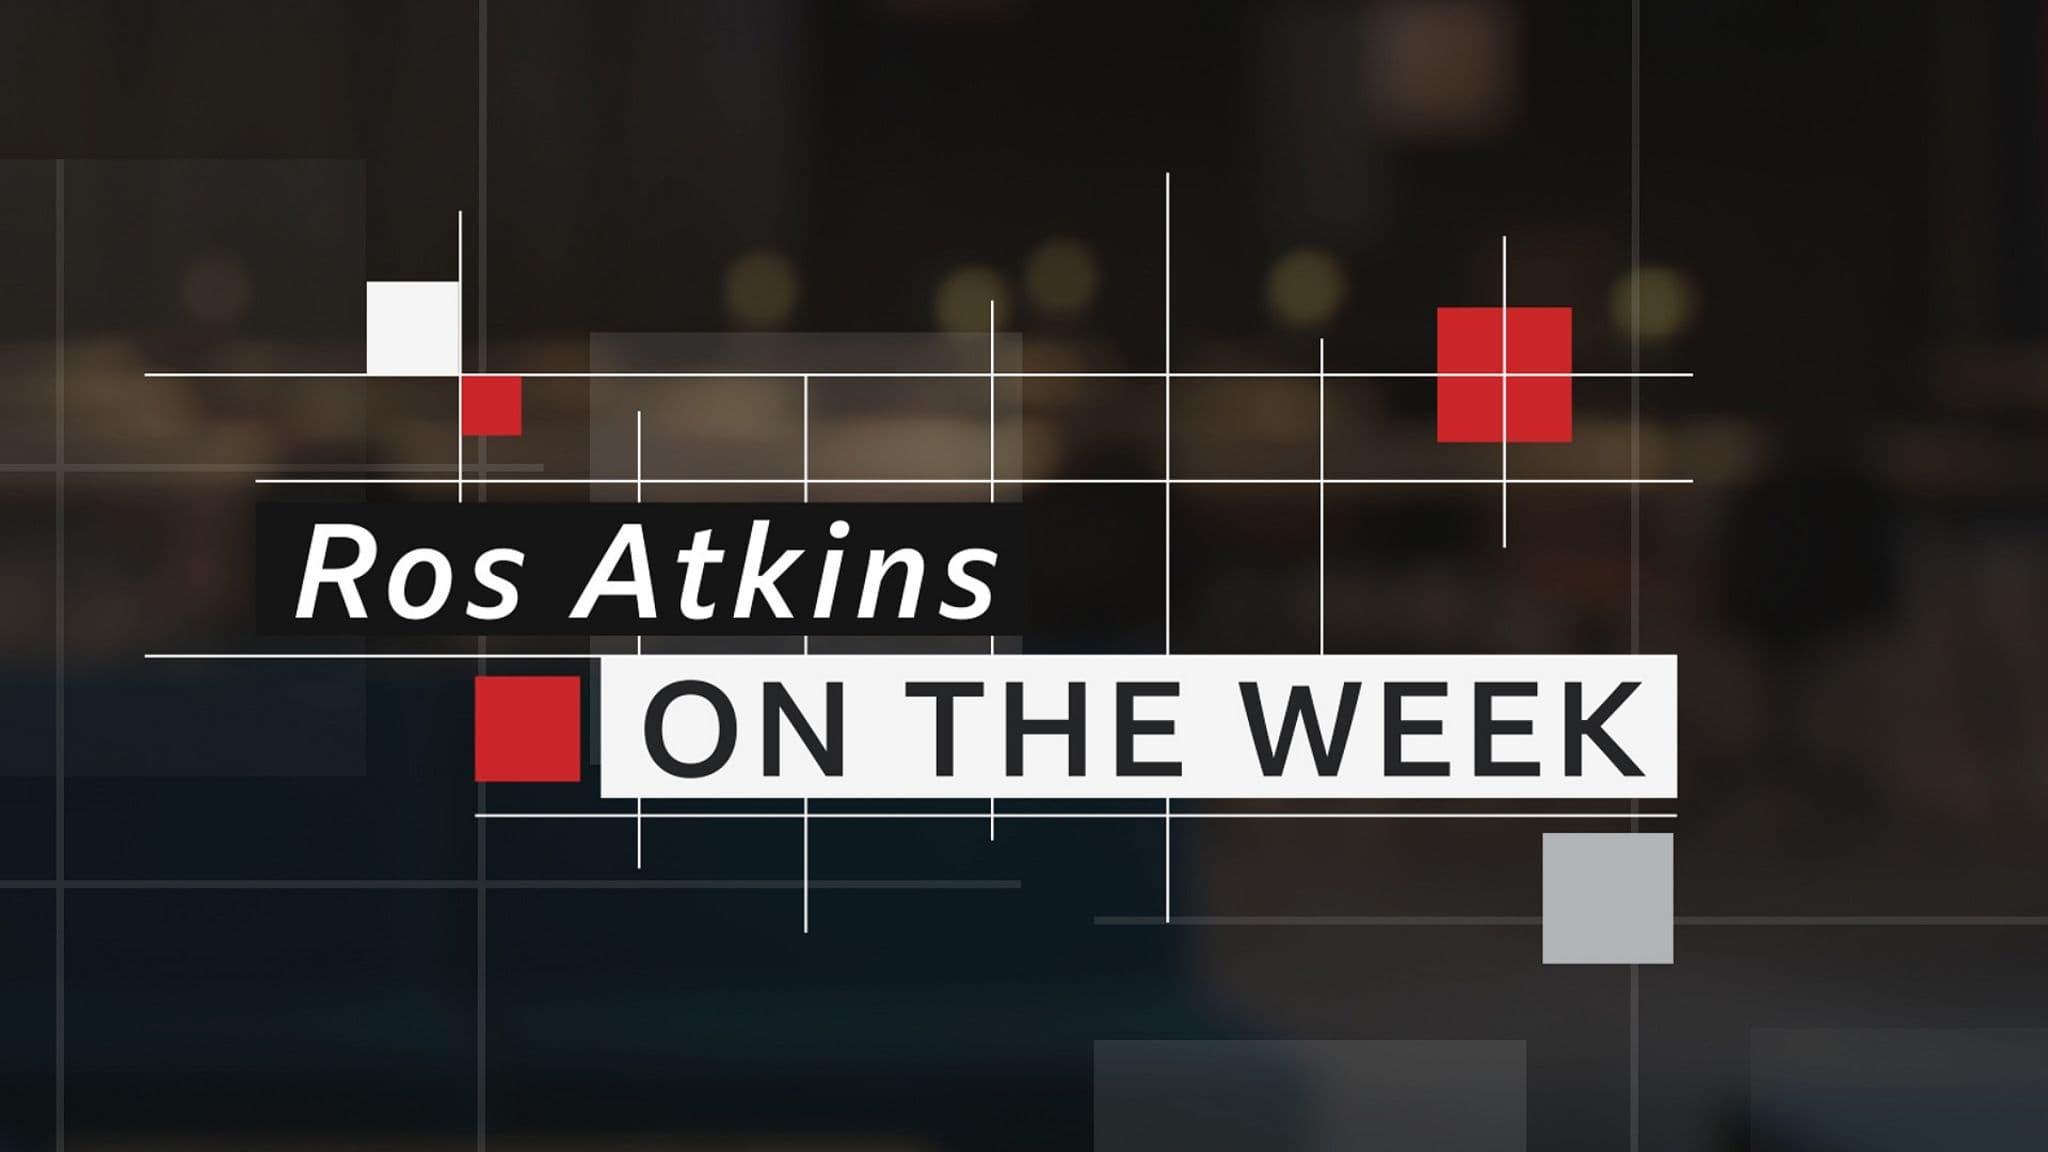 Ros Atkins On The Week backdrop